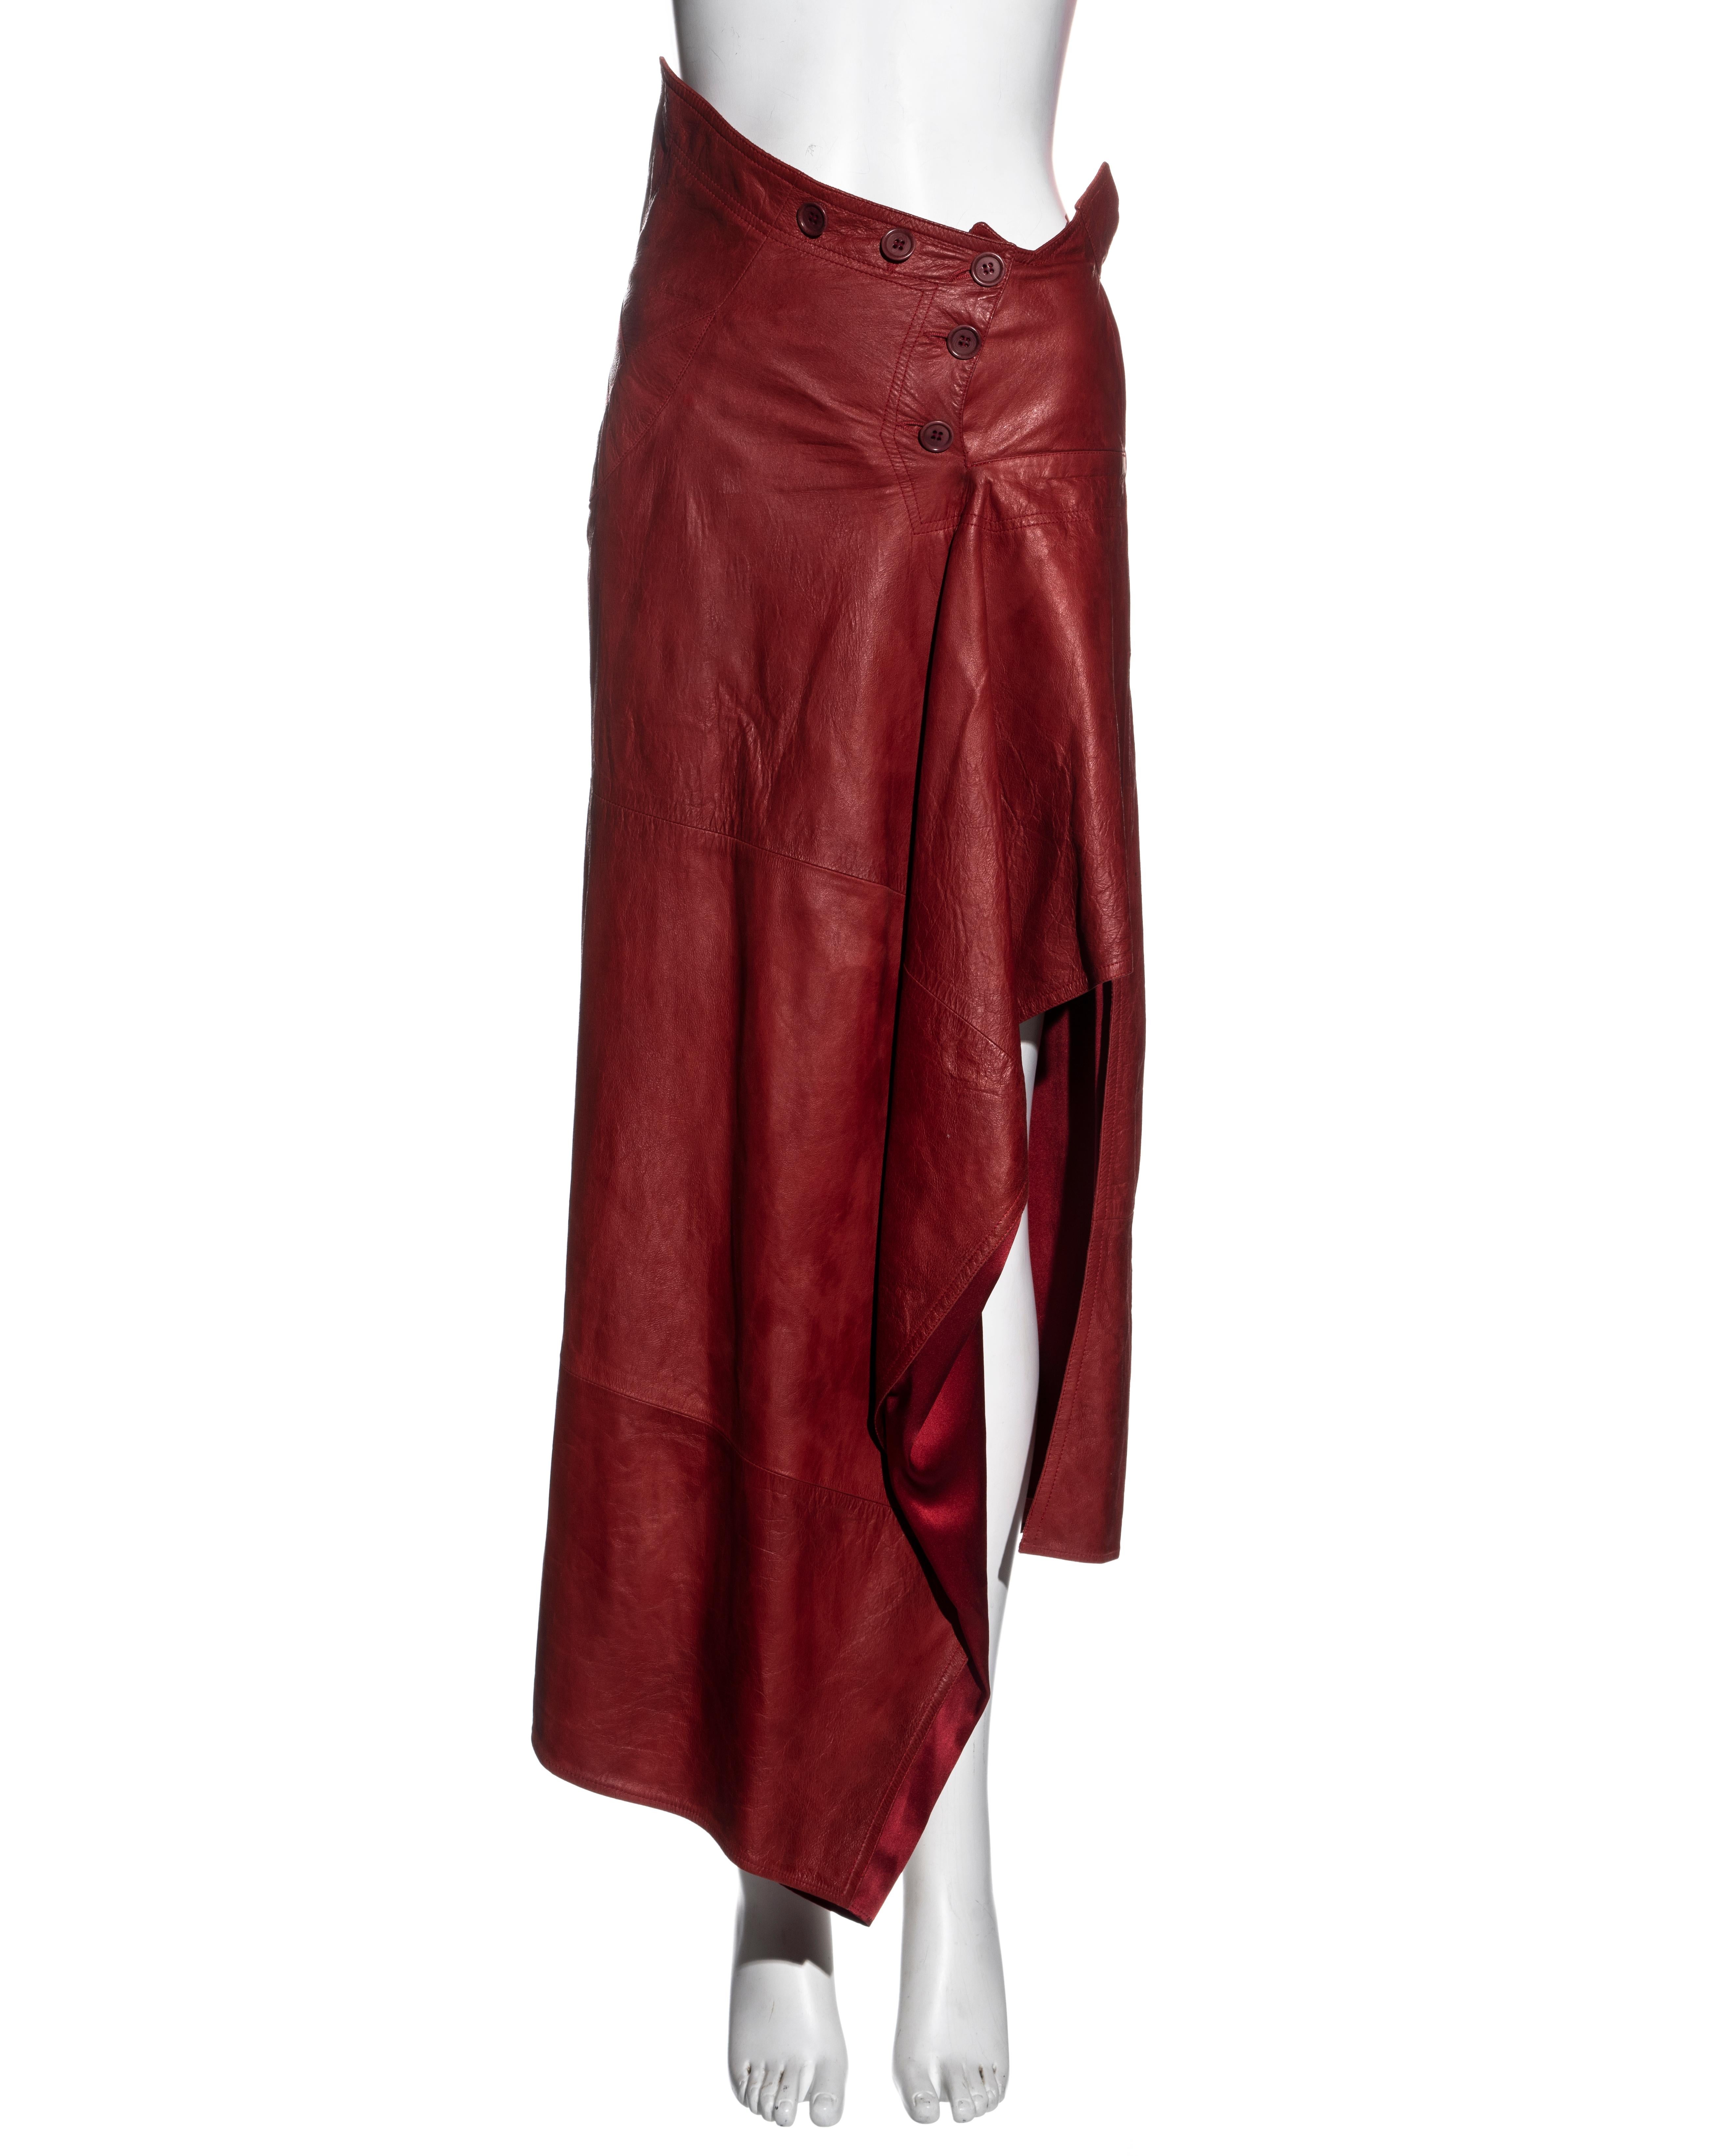 ▪ Christian Dior red leather skirt 
▪ Designed by John Galliano
▪ Asymmetric cut 
▪ Leg slit 
▪ Lace-up fastening 
▪ Front button closures 
▪ Silk lining 
▪ FR 36 - UK 8 - US 4
▪ Spring-Summer 2000
▪ 100% Leather
▪ Made in France